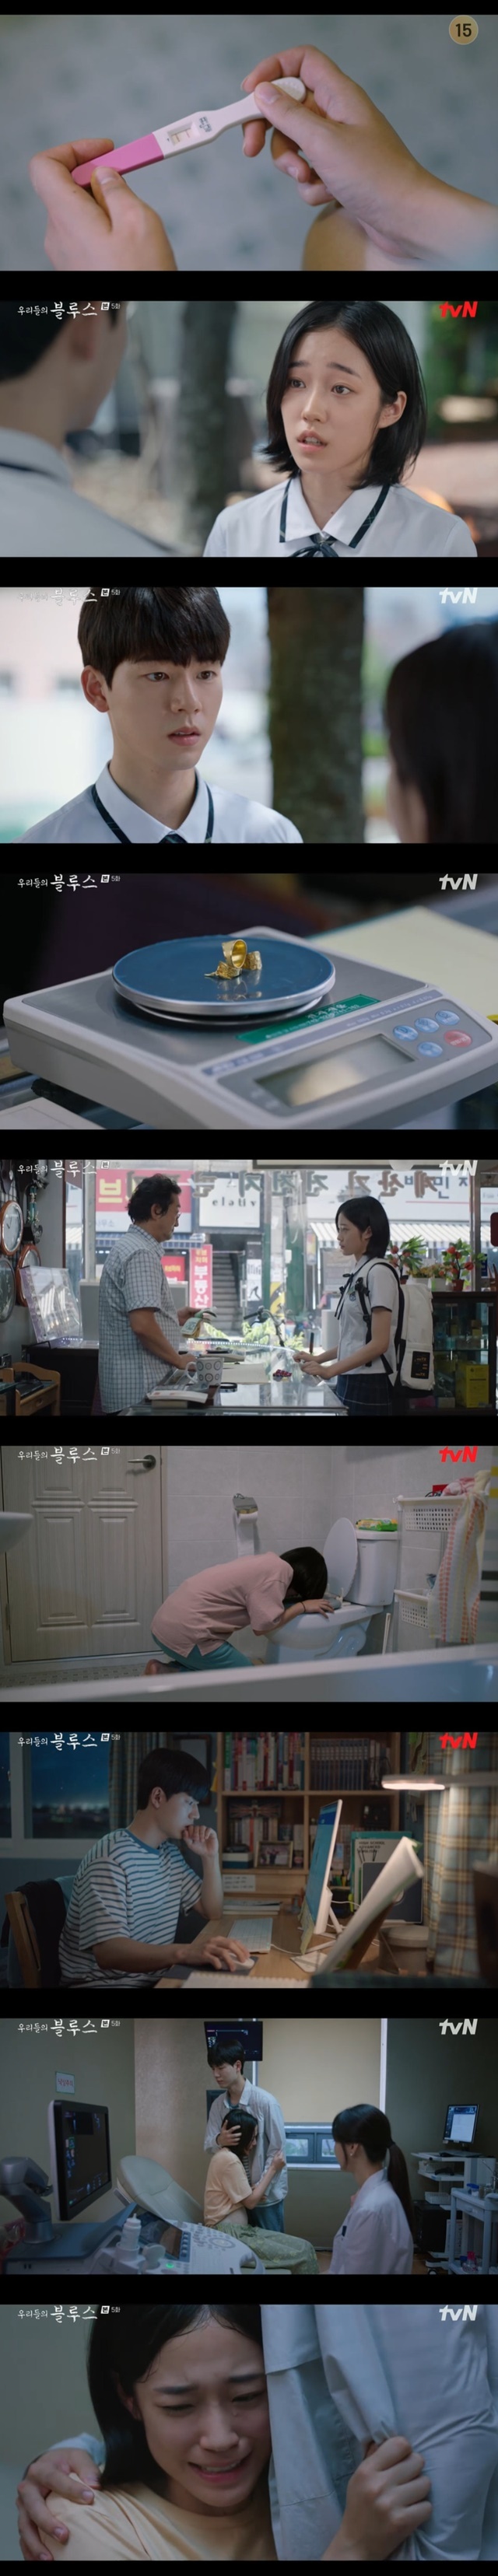 18-year-old Noh Yoon-seo and Bae Hyun-sung high school couple faced a six-month pregnancy.In the 5th episode of TVNs Saturday drama Our Blues (playplayed by Noh Hee-kyung/directed by Kim Gyu-tae), which was broadcast on April 23, the process of knowing six months of pregnancy was drawn by airing stock (played by Noh Yoon-seo) and Chung Hyeon (played by Bae Hyun-sung).18-year-old high school students airing stock and Chung Hyeon are a model student who is in second place in the school while secretly dating her father.For such a pretty couple, the airing stock did not menstruate and the pregnancy problem was raised.Chung Hyon bought an airing stock a pregnancy tester, inflated living expenses to his father, Jung In-kwon (Park Ji-hwan), and paid for the hospital expenses by taking out the stone ring for the school expenses.The airing stock confirmed two lines of pregnancy test keys and lamented, I was going to leave this sick Jeju, college only.Then Chung Hyeon urged him to tell me something. The airing stock said, What do you say? I did three pregnancy tests you bought and two lines of buds?Im sorry, but Im sorry, Ive only done it twice, and Ive done it.Chung Hyeon said, Lets think a little more.If you erase it, you will find the safest way and give birth. But the airing stock said, How do you give birth? What about college? In Seoul?Is our love so great that you can have a baby with your whole life?If we know we have a child now, your former gangster will kill you, and our father will kill me and die. However, the problem of pregnancy is that the first-class airing stock can not be solved. Mr. Kim Eun-bang, who sold Chung Hyeons stone ring, noticed the situation and said, Write down your parents contact information.If you cant write it down, you can pay 200,000 won for one. The same goes for Chung Hyeon, the second-placed student in the school.When Chung Hyon posted a consultation on the Internet, the comment was only advertising articles selling 100 percent under 12 weeks.When the airing stock called the obstetrics and gynecology department and asked, the answer was never to take the medicine sold on the Internet, and the airing stock deliberately went to the obstetrics and gynecology clinic far away from peoples eyes, but he confronted Jung Eun-hee (Lee Jung-eun) and lied impurely.The hospital doctor who found it so difficult made an uncomfortable atmosphere by asking the airing stock, What is the last sexual relationship?The results are more shocking. The doctor told the airing stock, The physiology may be implantation three months ago. Look at this.We need to take it out in six months with only induction. Theres a lot of bleeding because its an anterior placenta, he said.When the airing stock asked, What is the pre-placenta? The doctor did not elaborate on Find the Internet and get your parents consent.